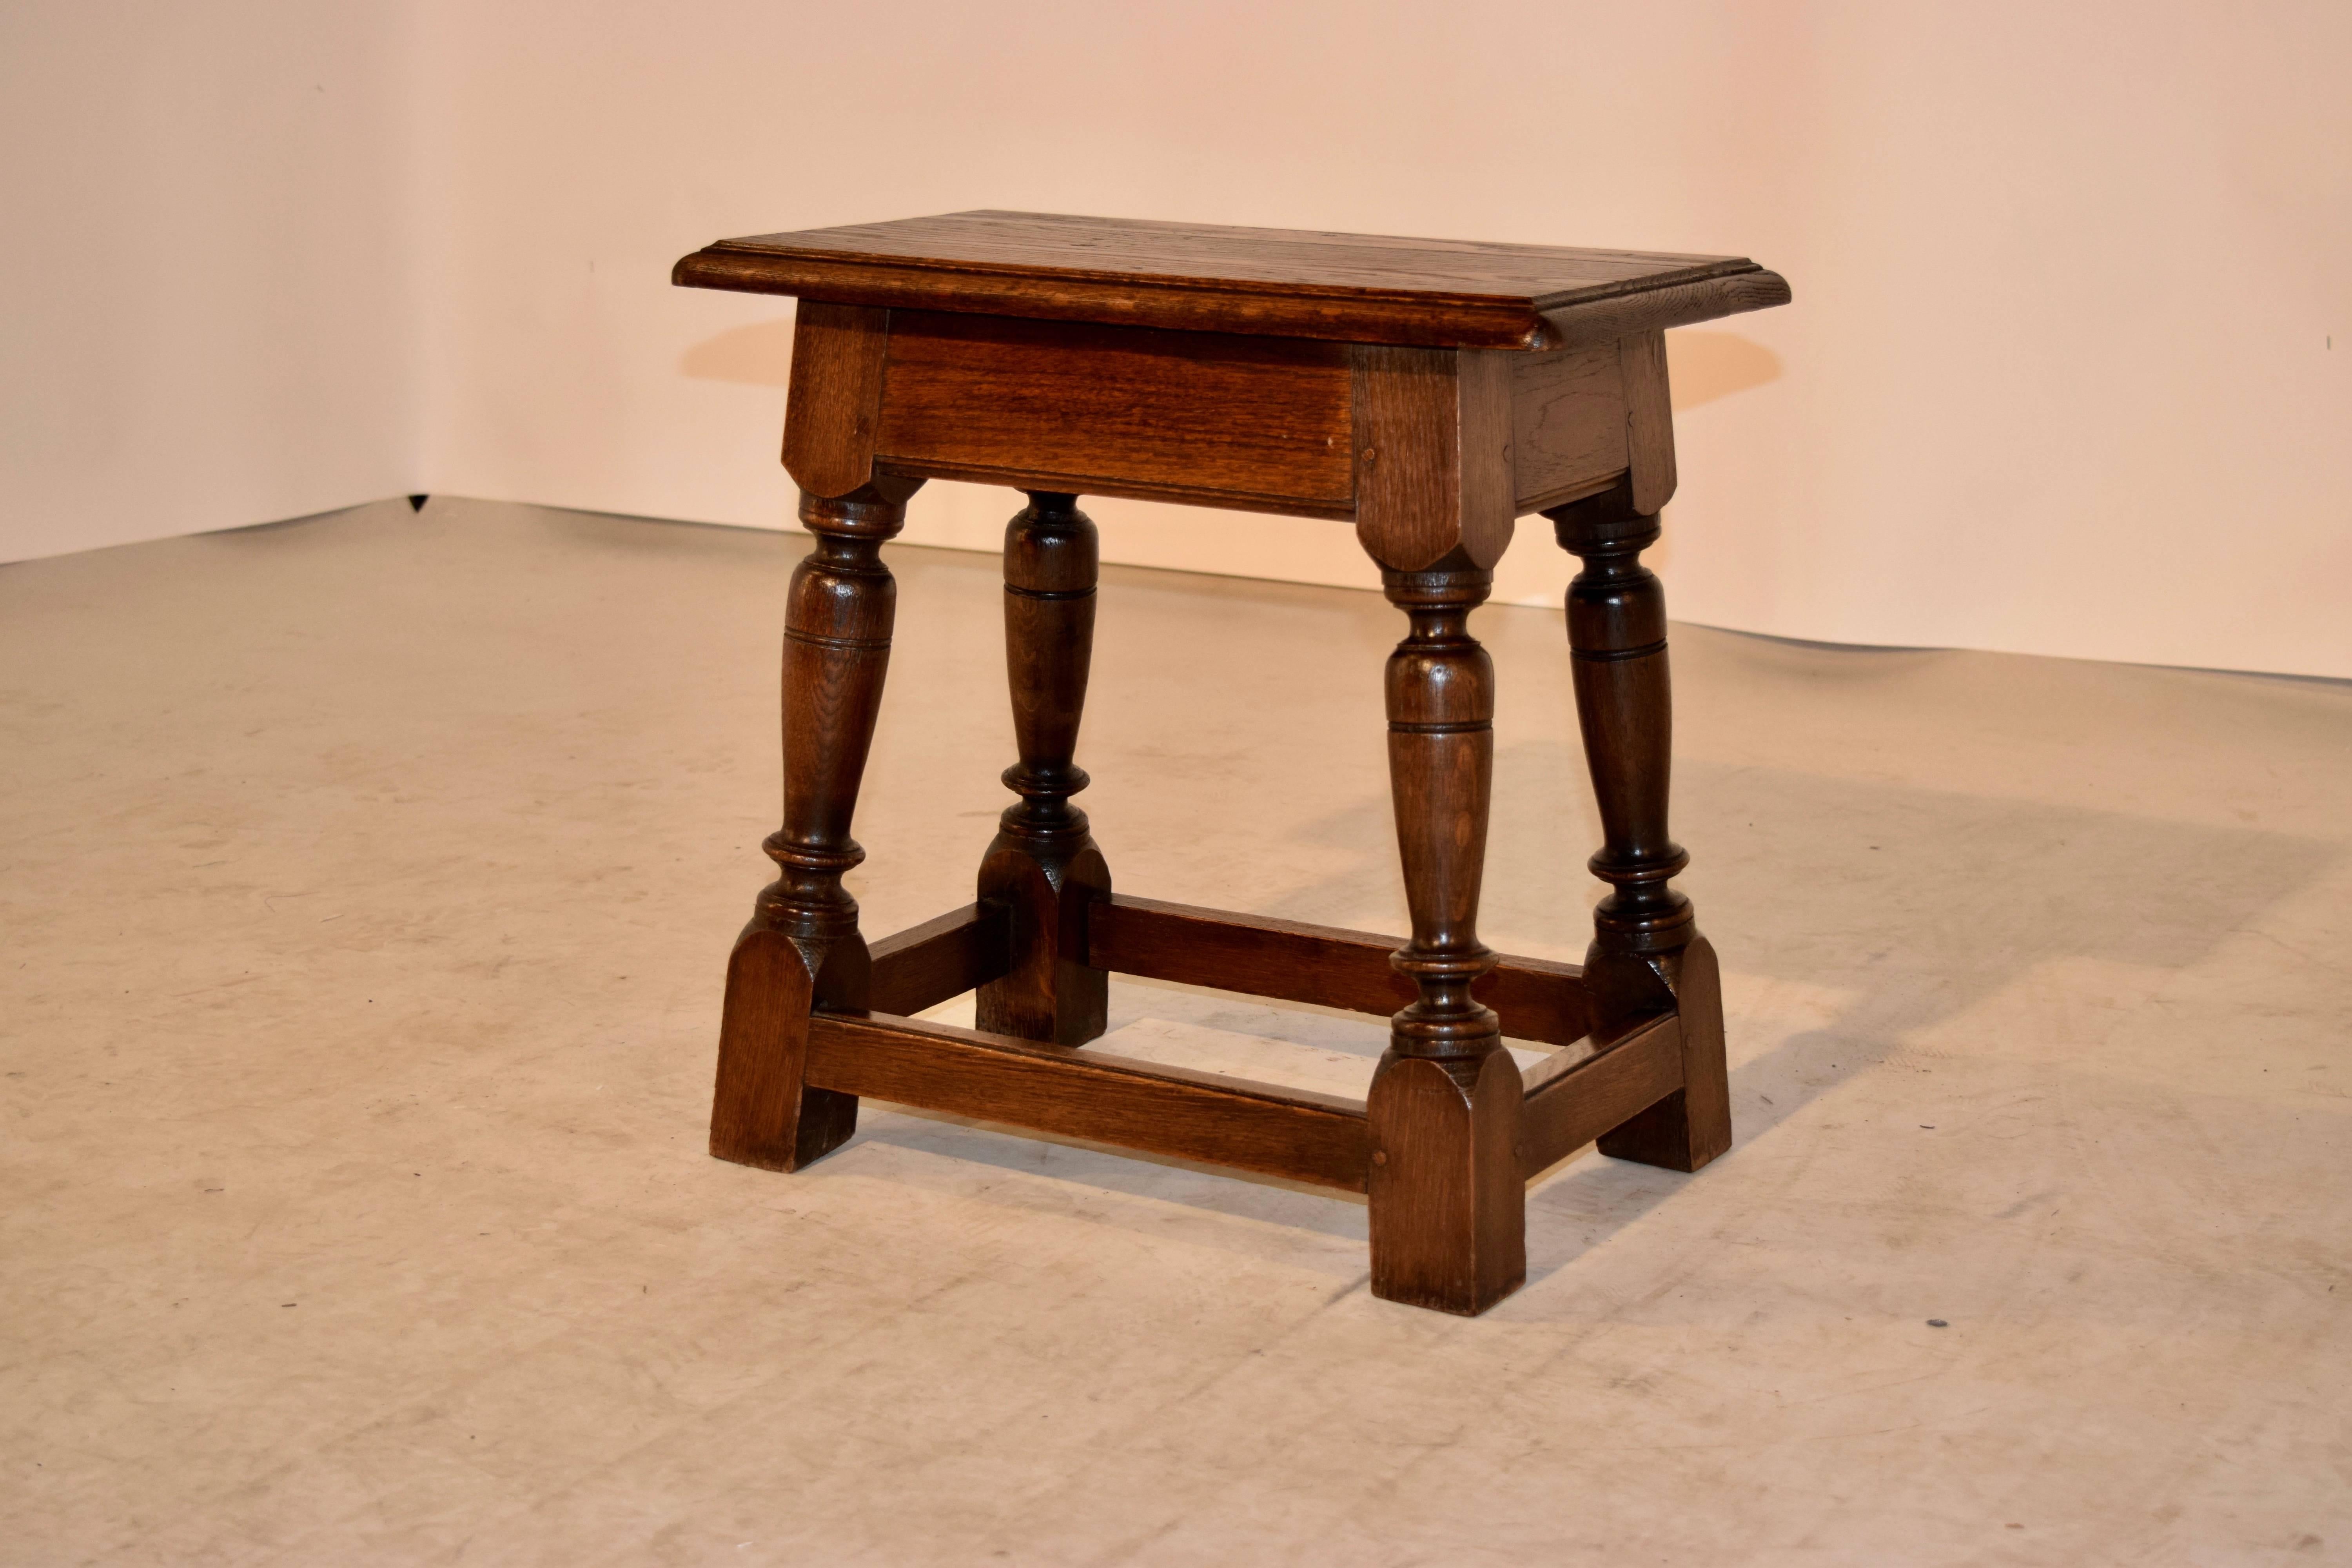 19th Century English joynt stool made from oak. The top has a molded and beveled edge around the top following down to a simple apron and simple hand-turned legs, joined by stretchers. Wonderful pegged construction.
 